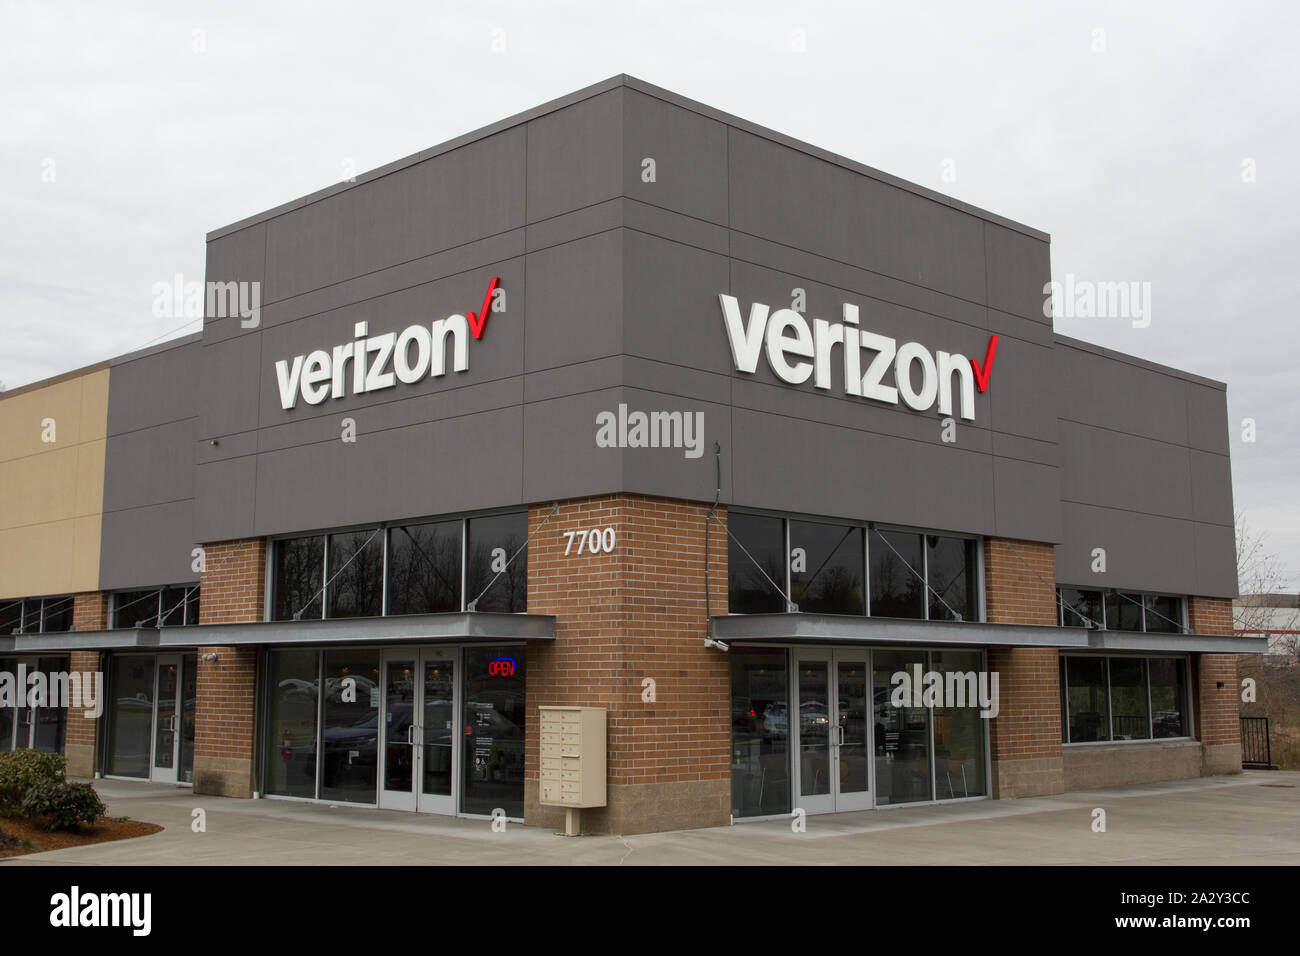 Tigard, Oregon - Feb 8, 2019: A full-service store for Verizon Wireless products and services. Stock Photo